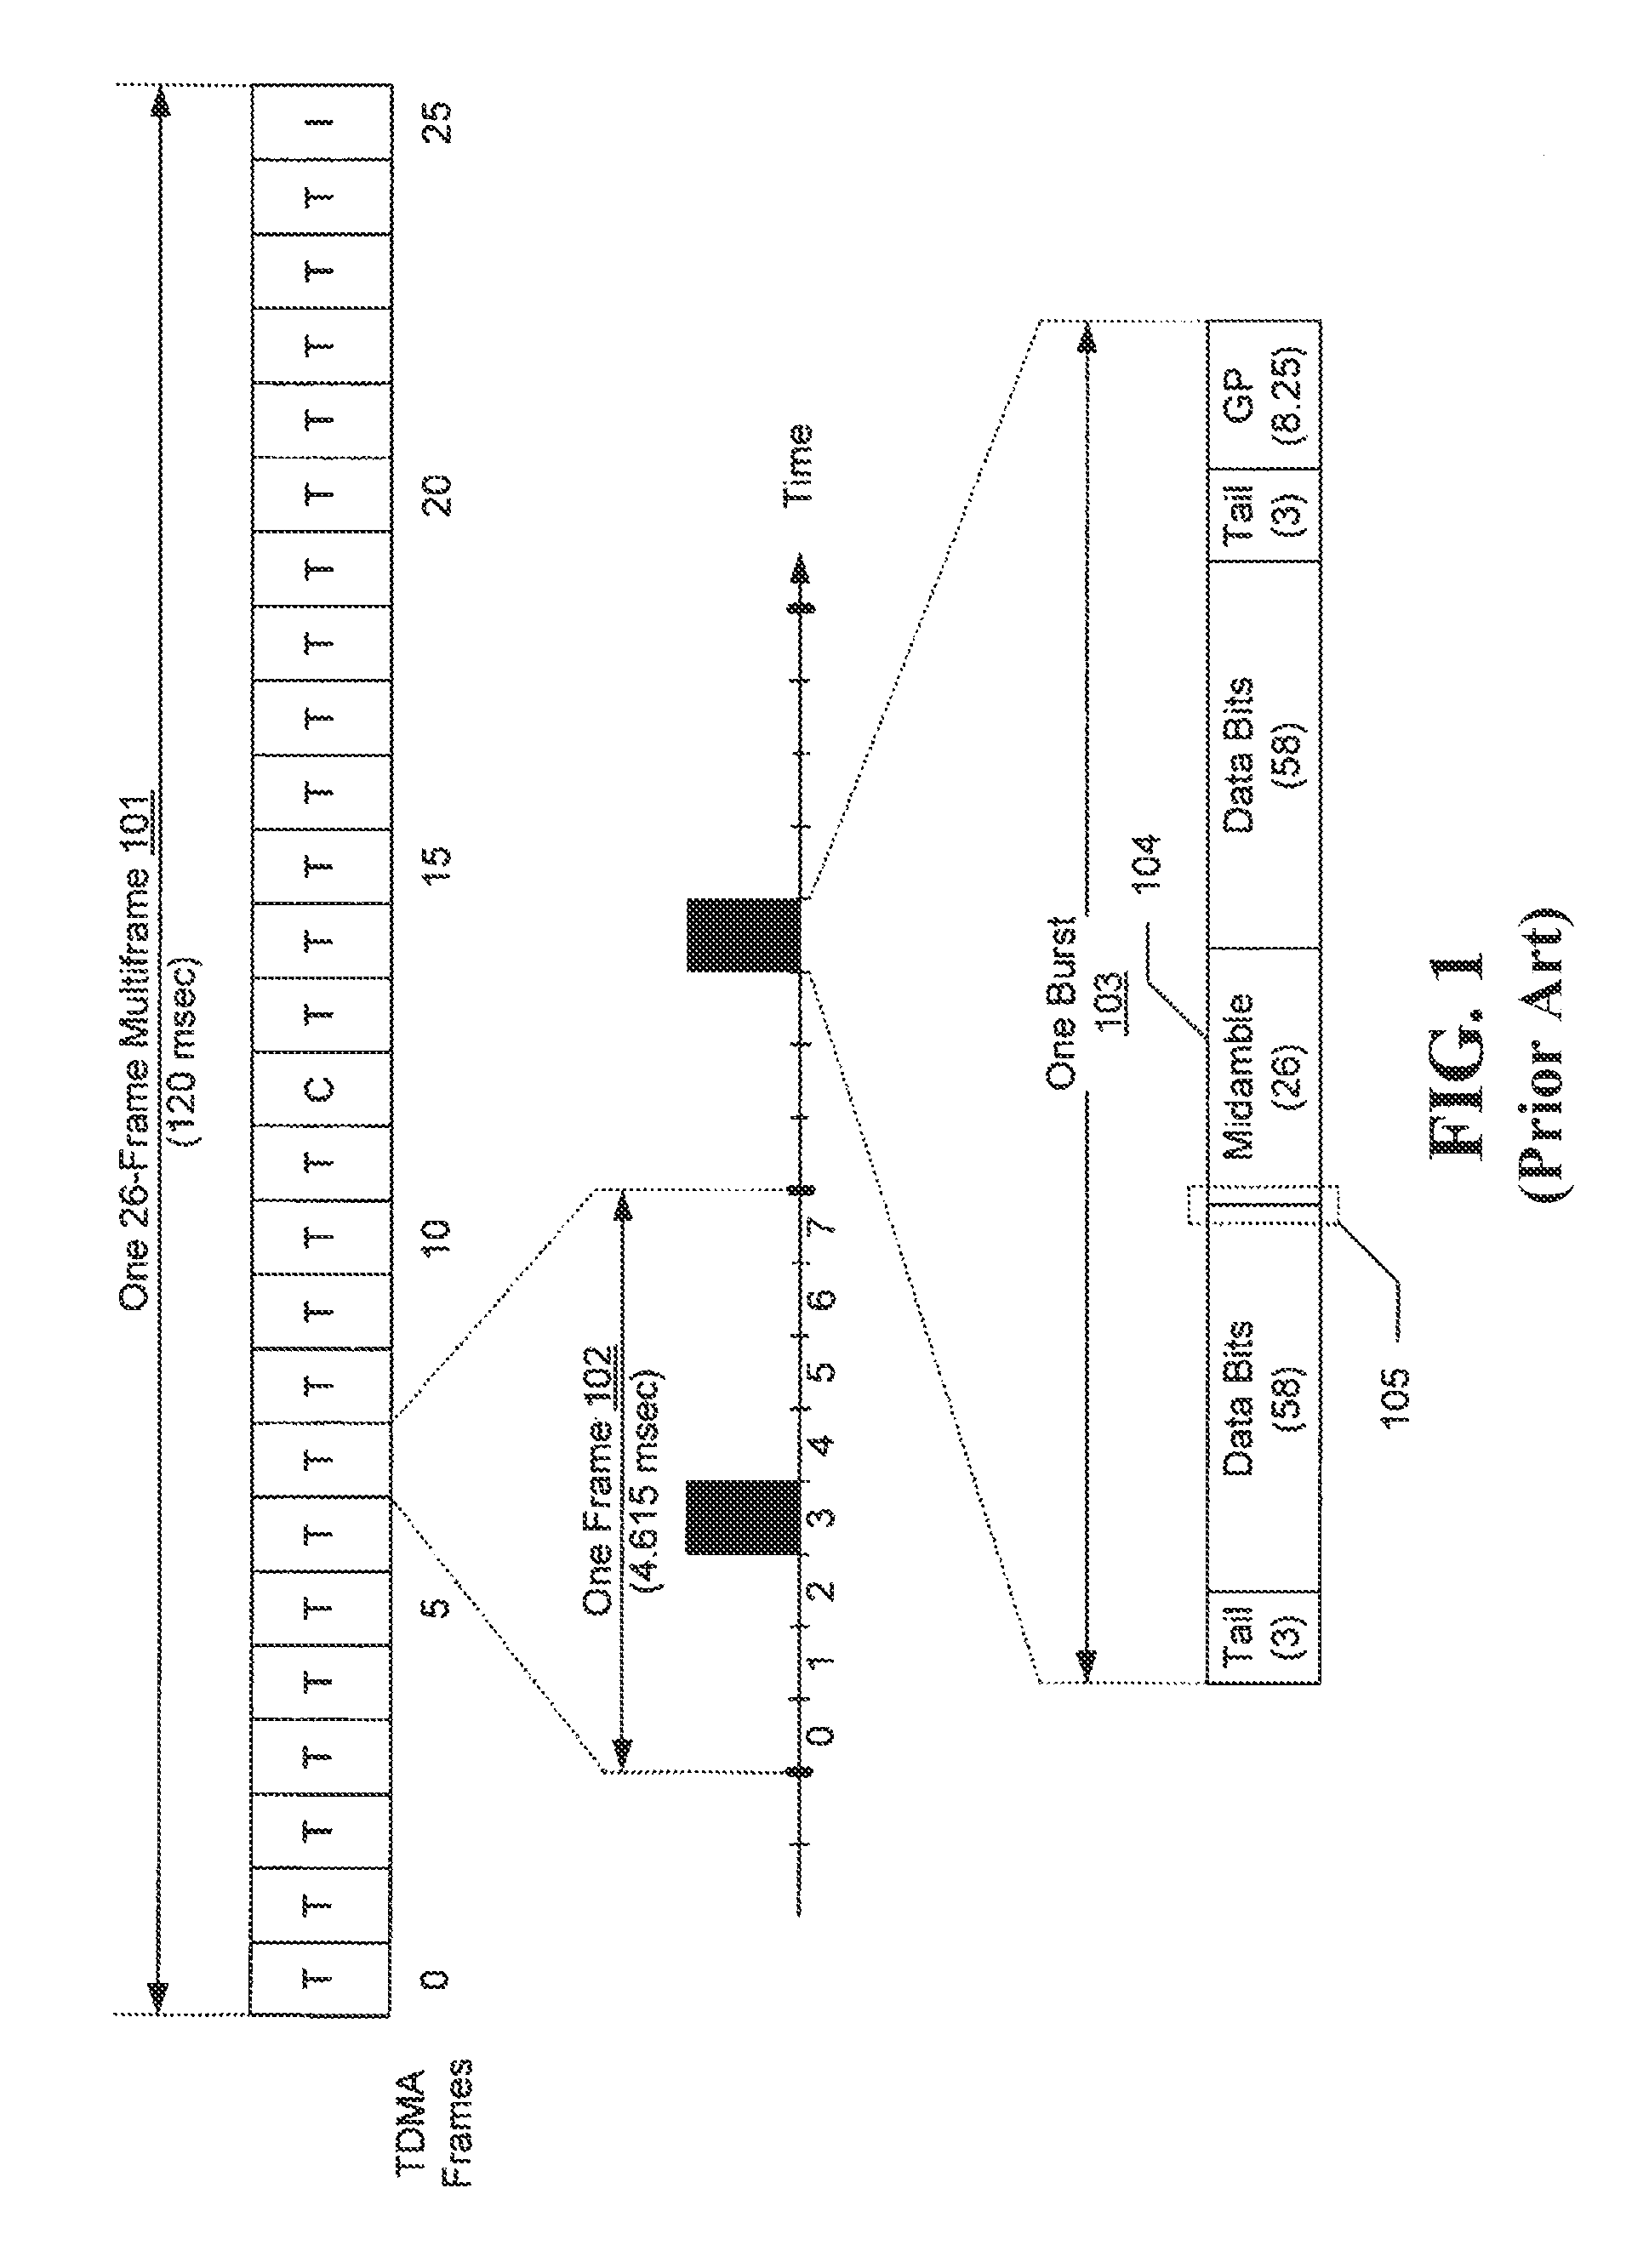 Interference cancellation under non-stationary conditions